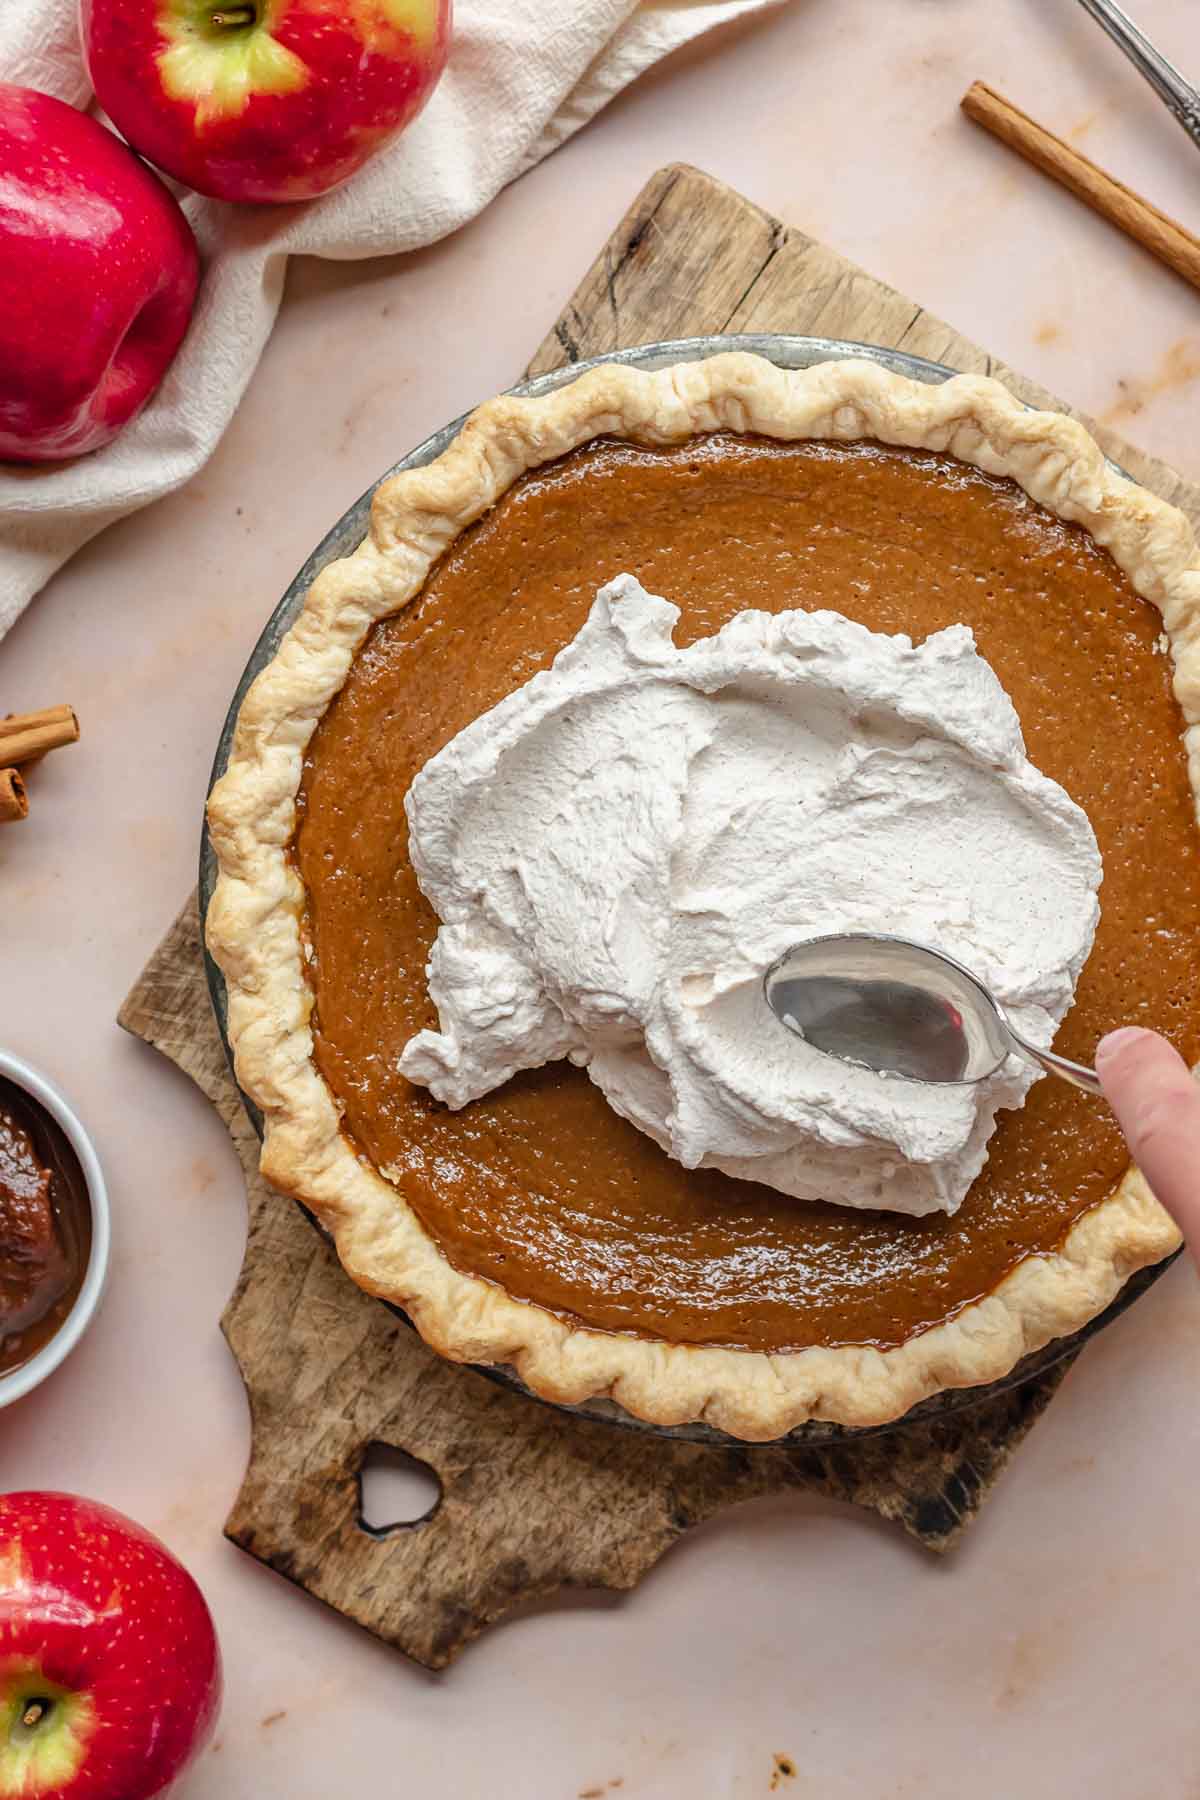 A spoon swooping cinnamon whipped cream on apple butter pie.